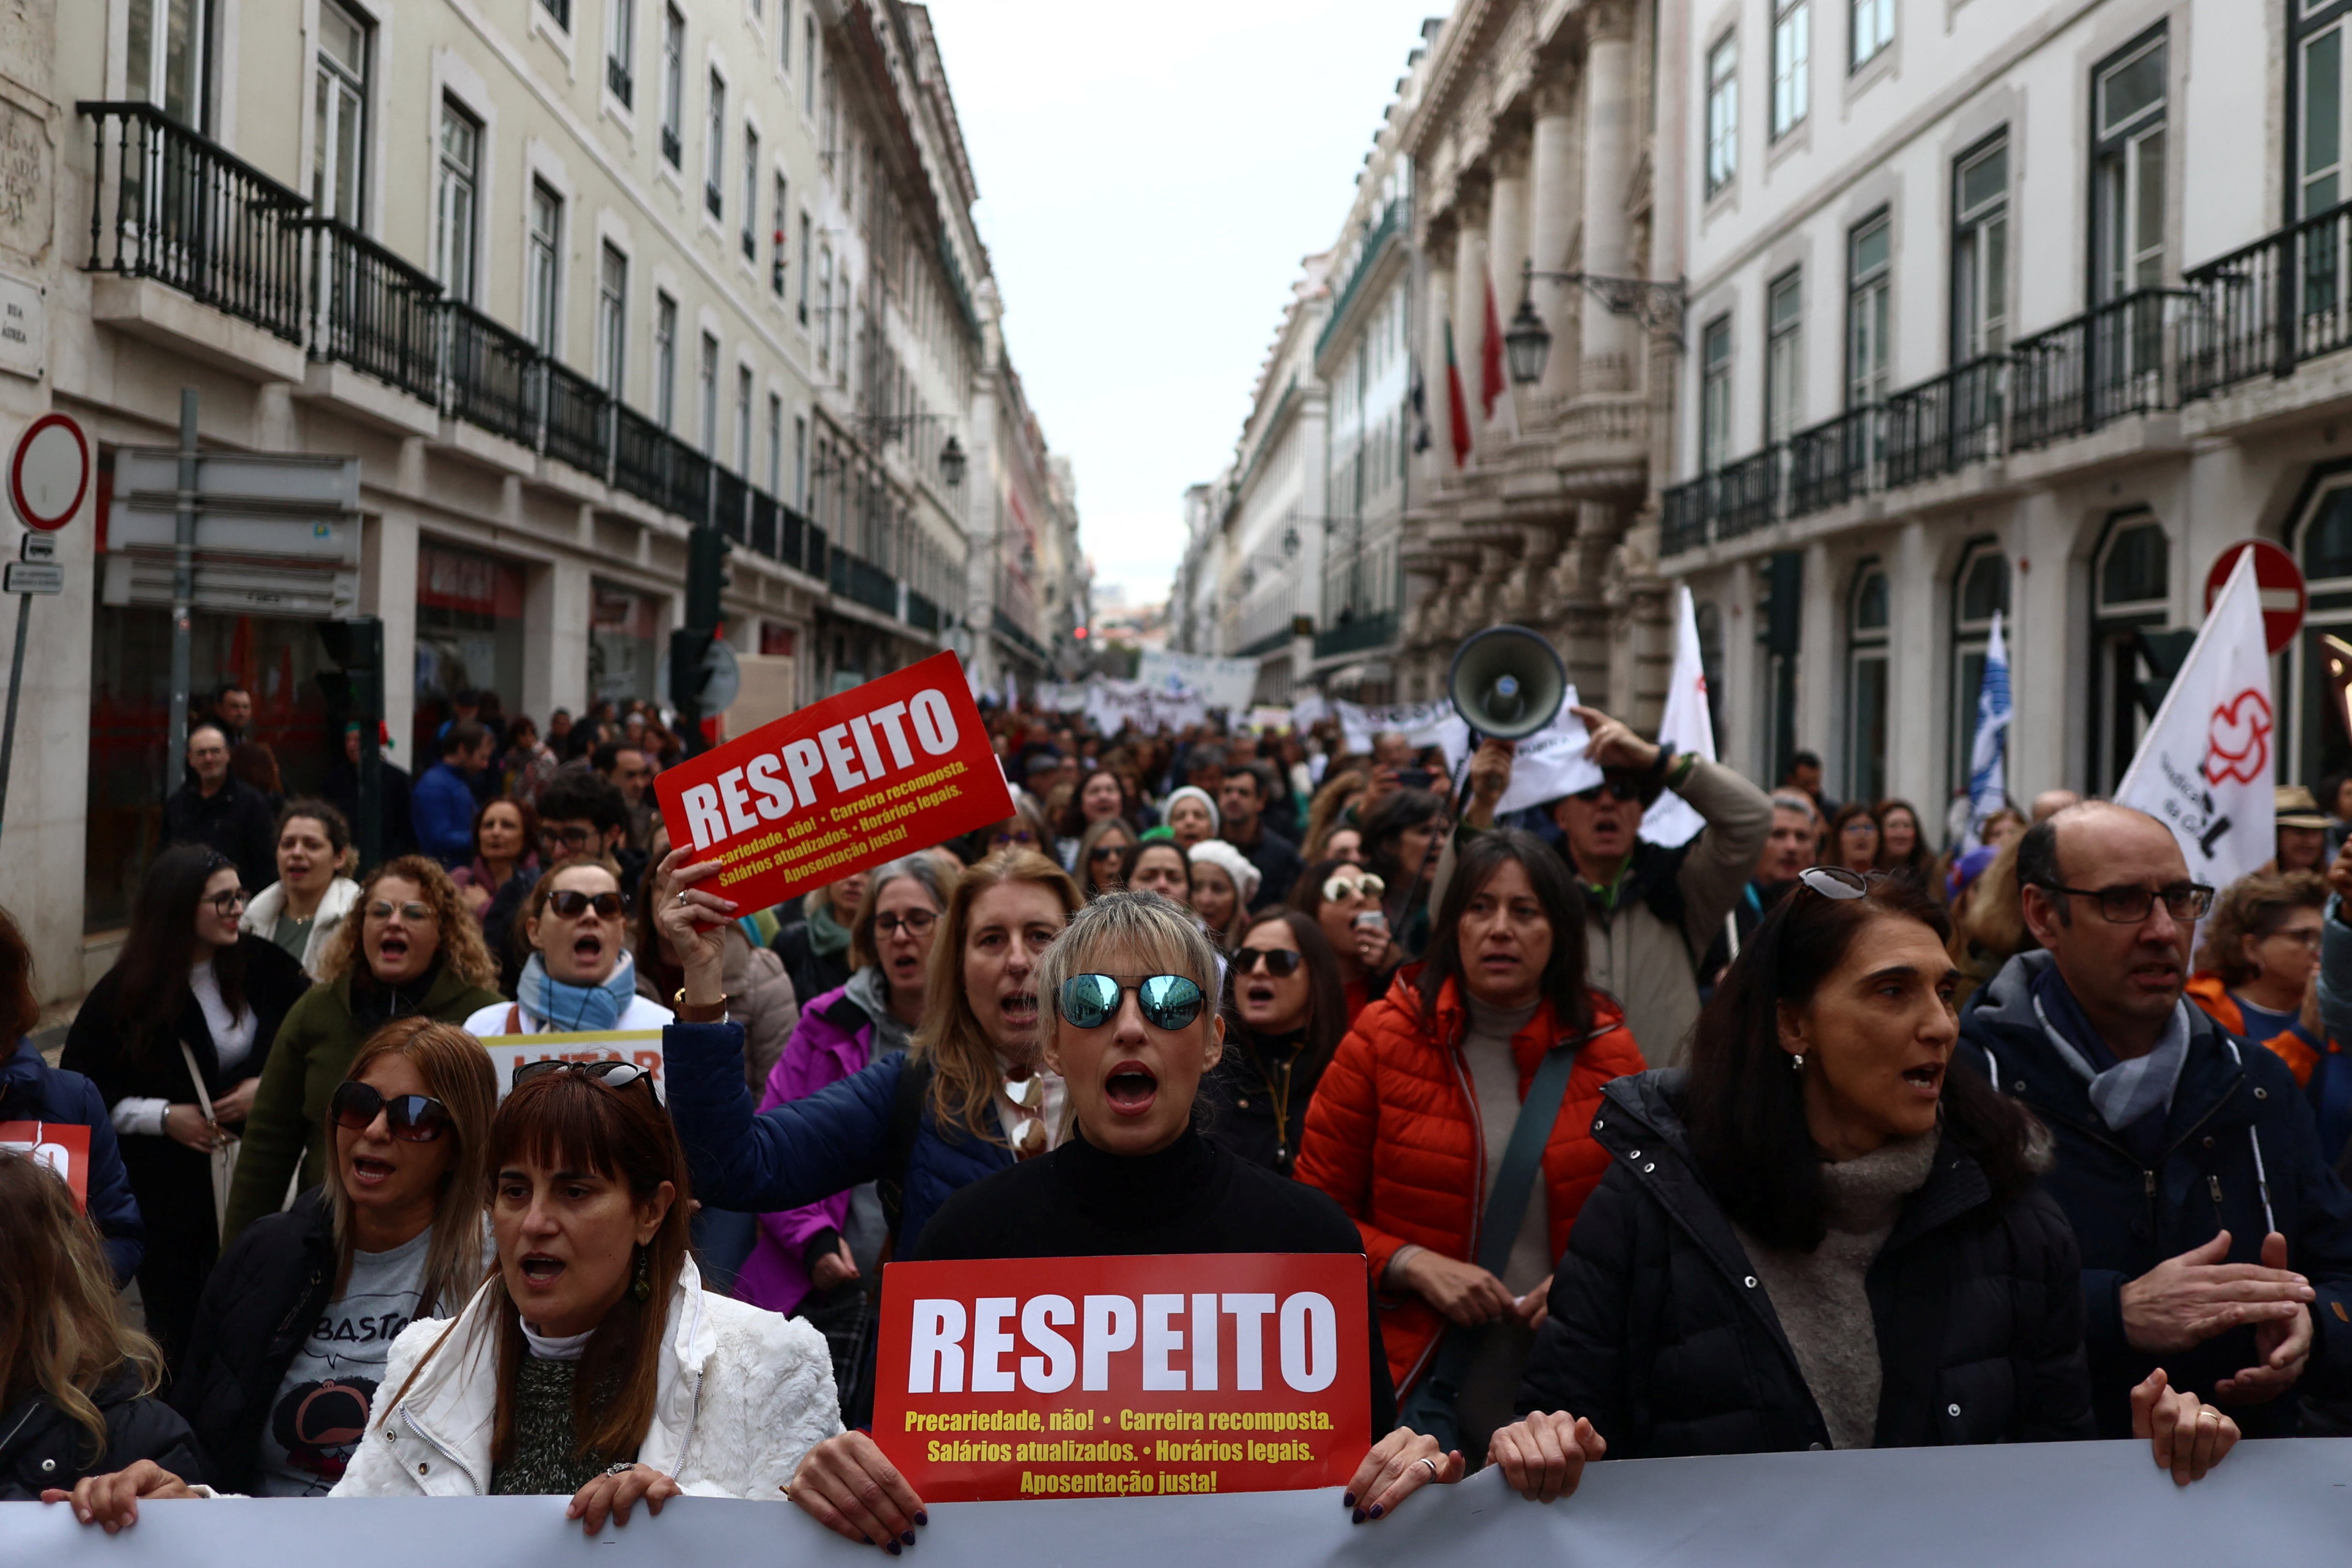 School teachers demonstrate for better salaries and working conditions in Lisbon